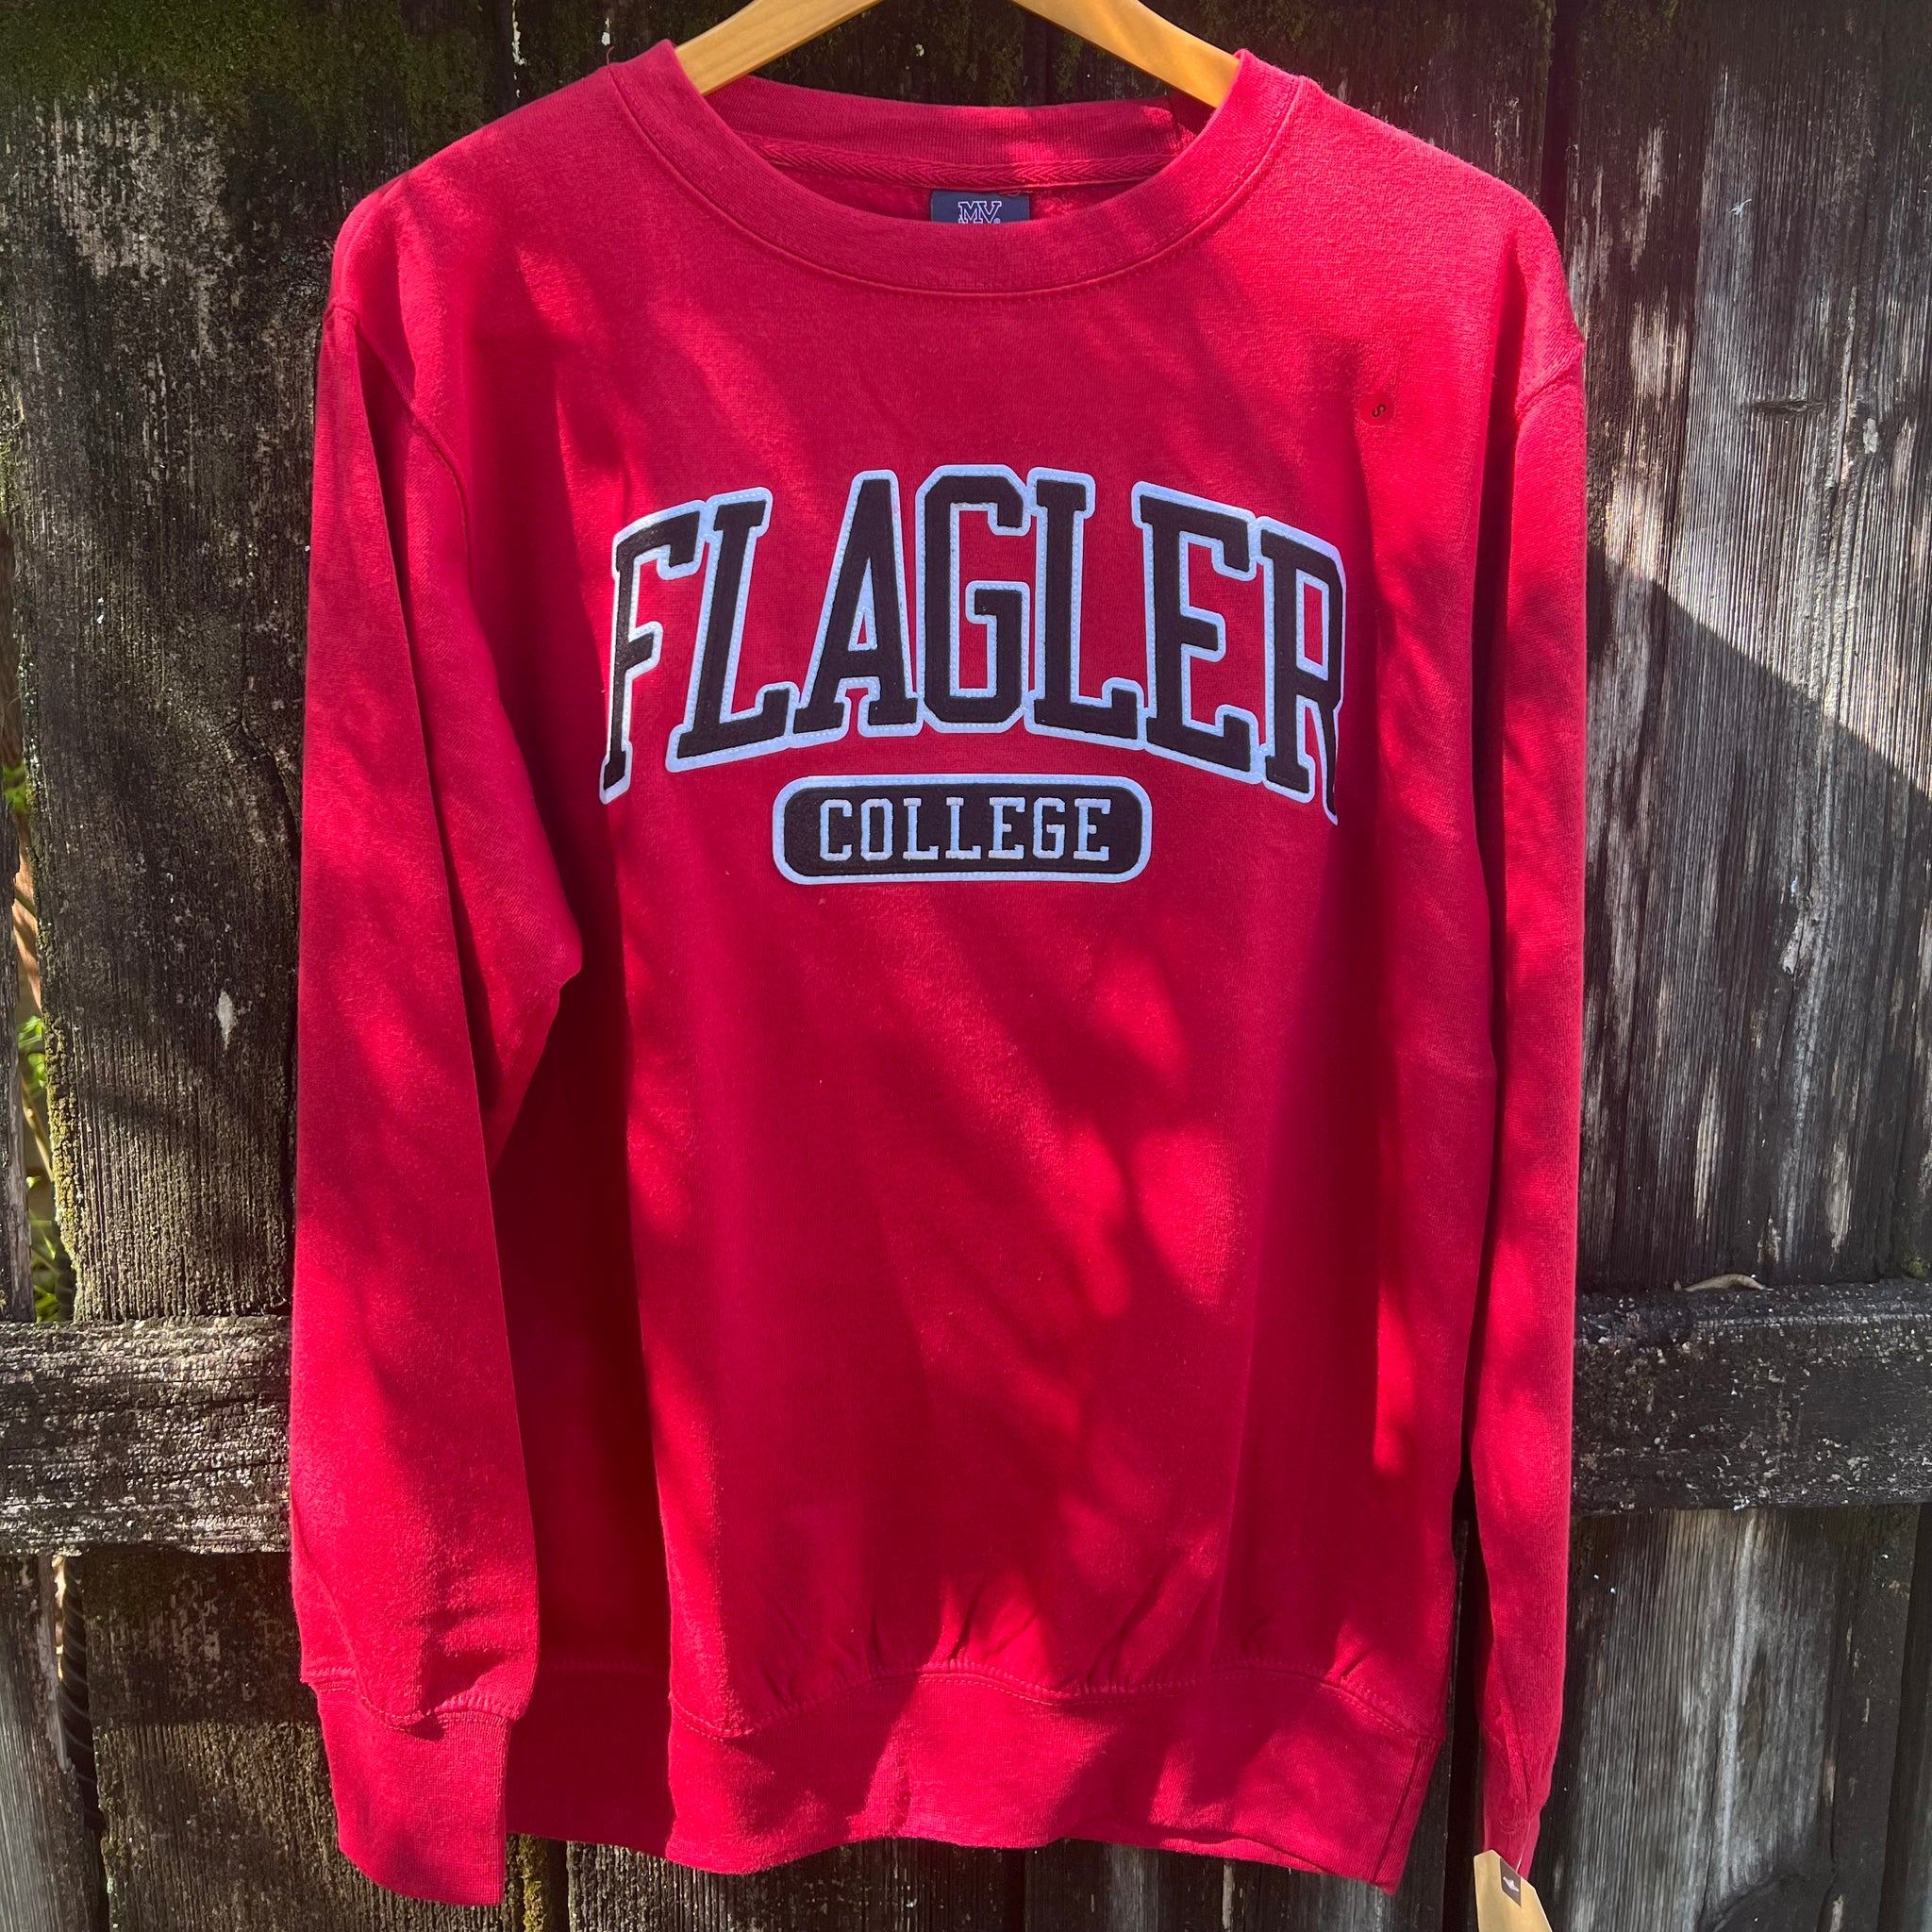 Crimson crewneck with black applique with white imprint saying Flagler over College